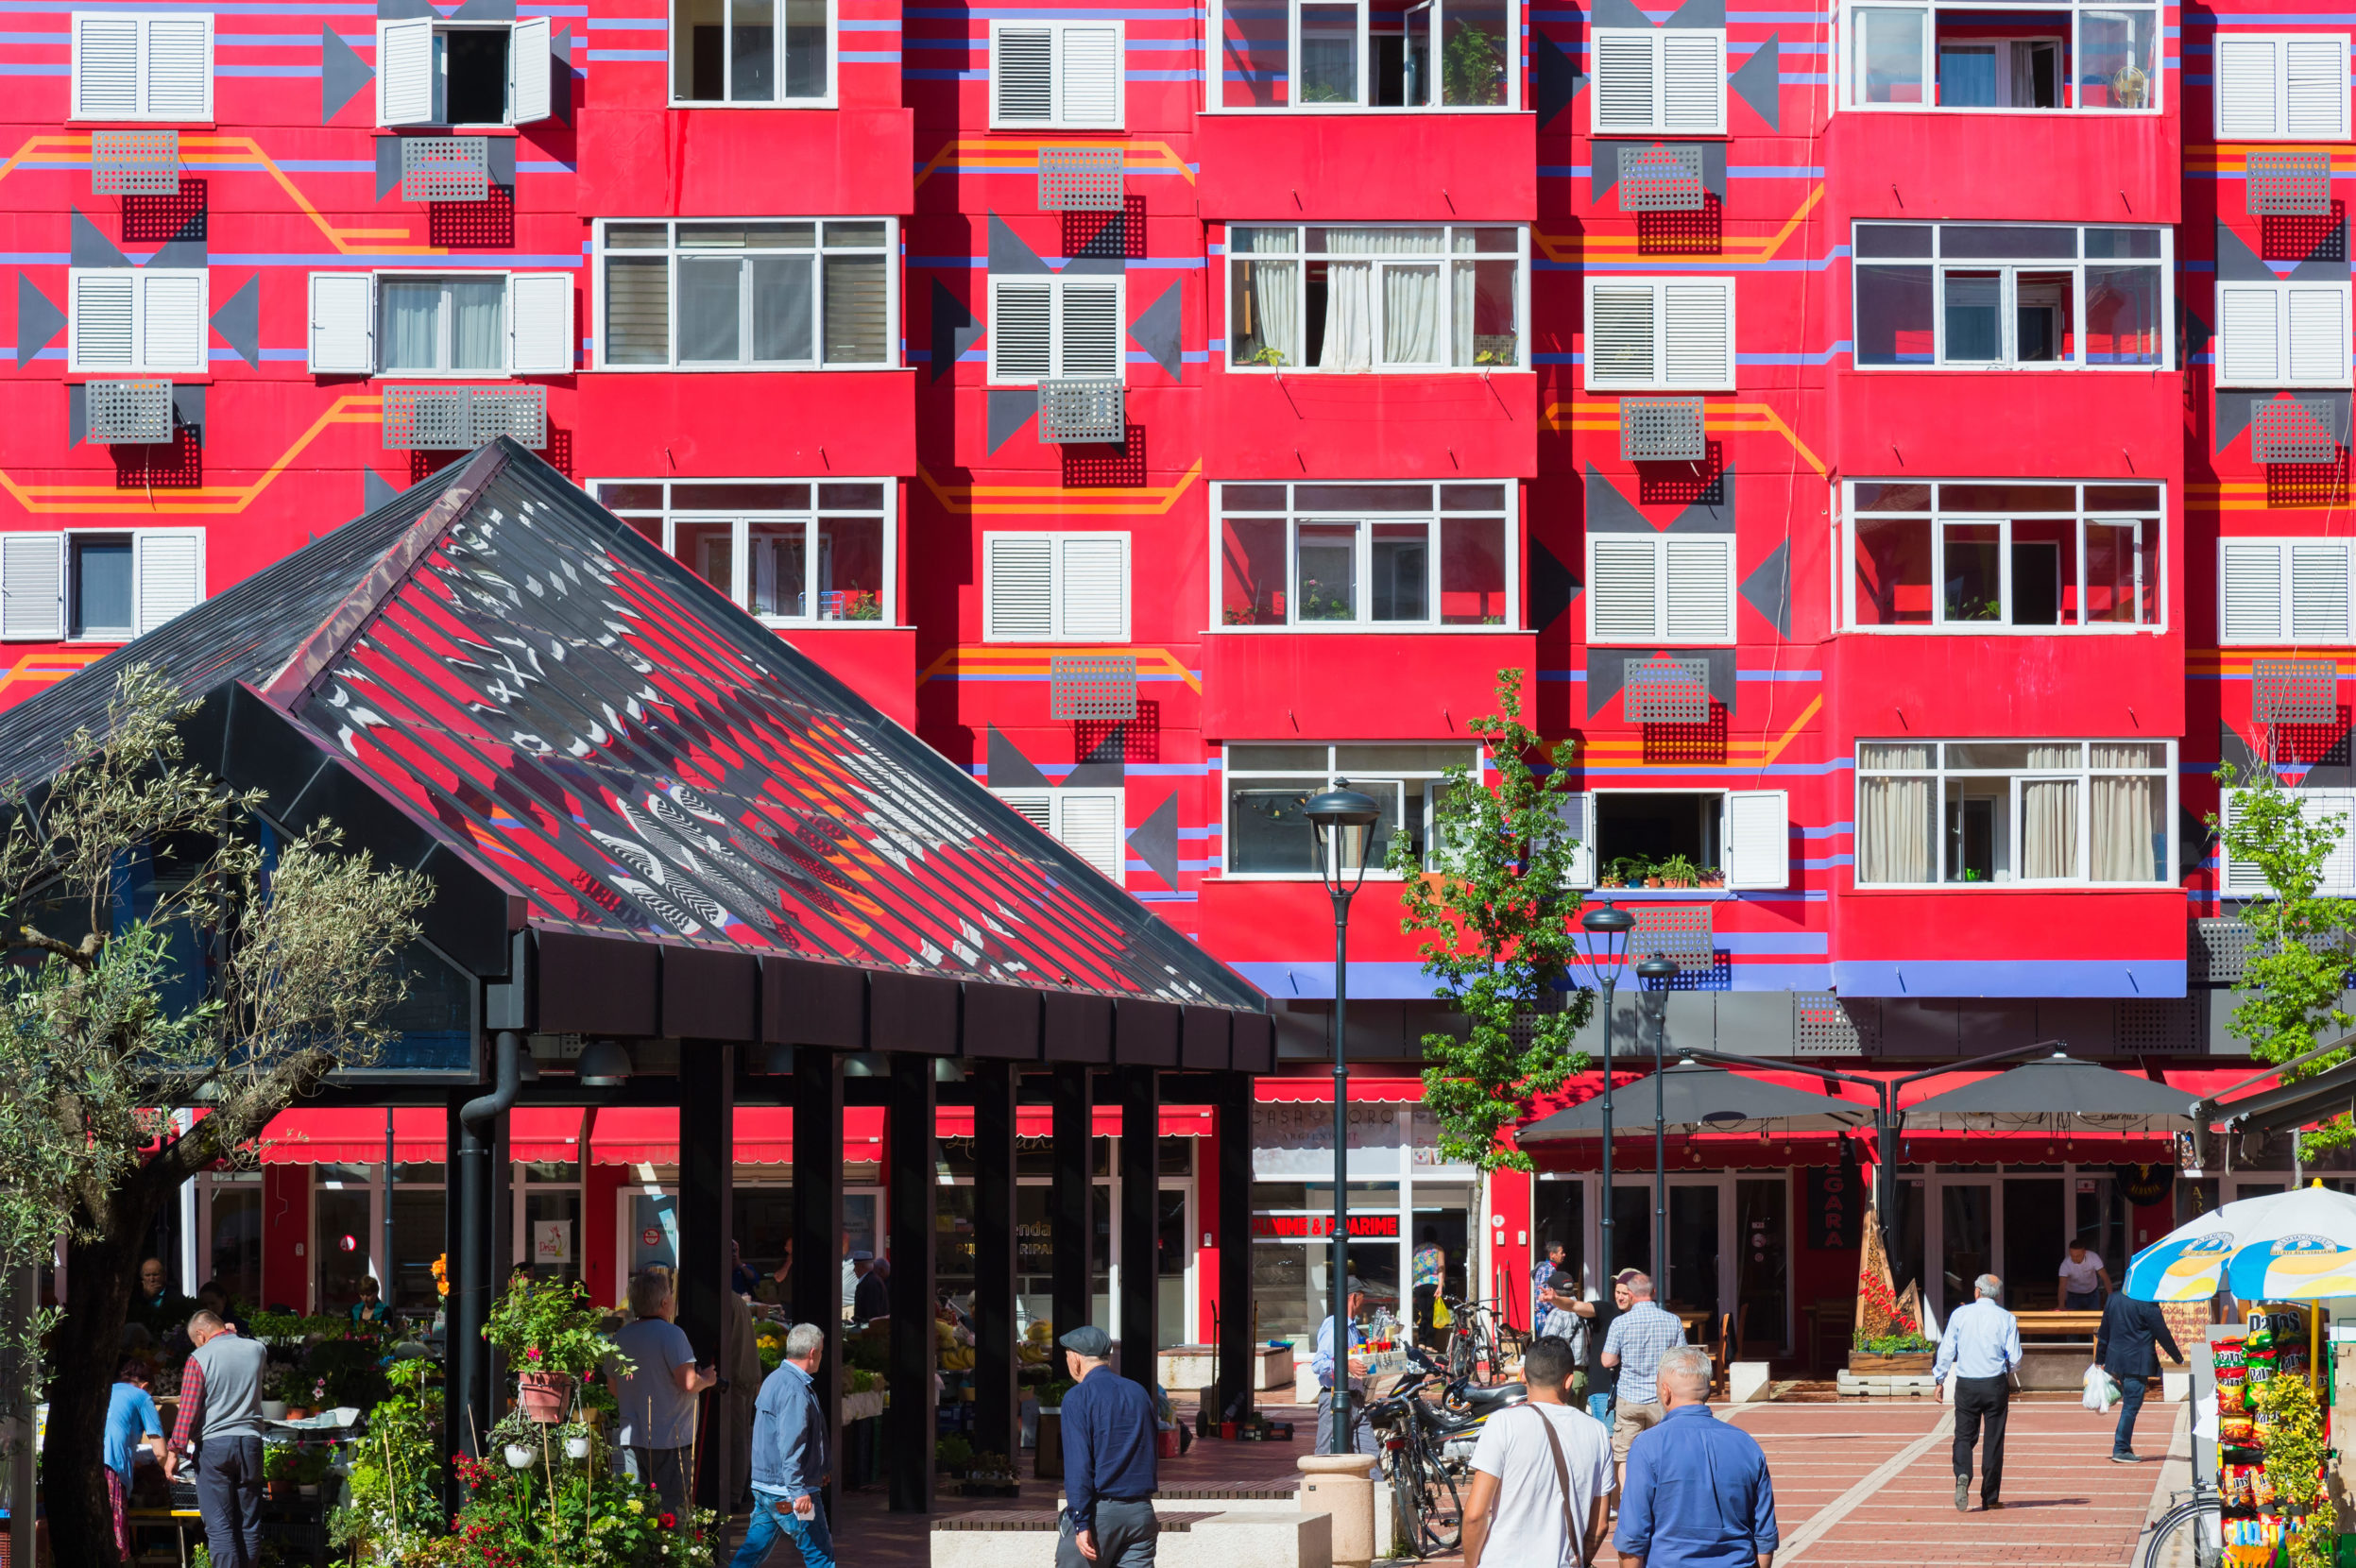 Brightly hued facades have become a hallmark of Tirana, Albania, ever since Edi Rama took the capital’s reins as mayor in 2000 and embarked on a painting campaign to rejuvenate communist-era buildings with color. Photo: Gabrielle/Adobe.